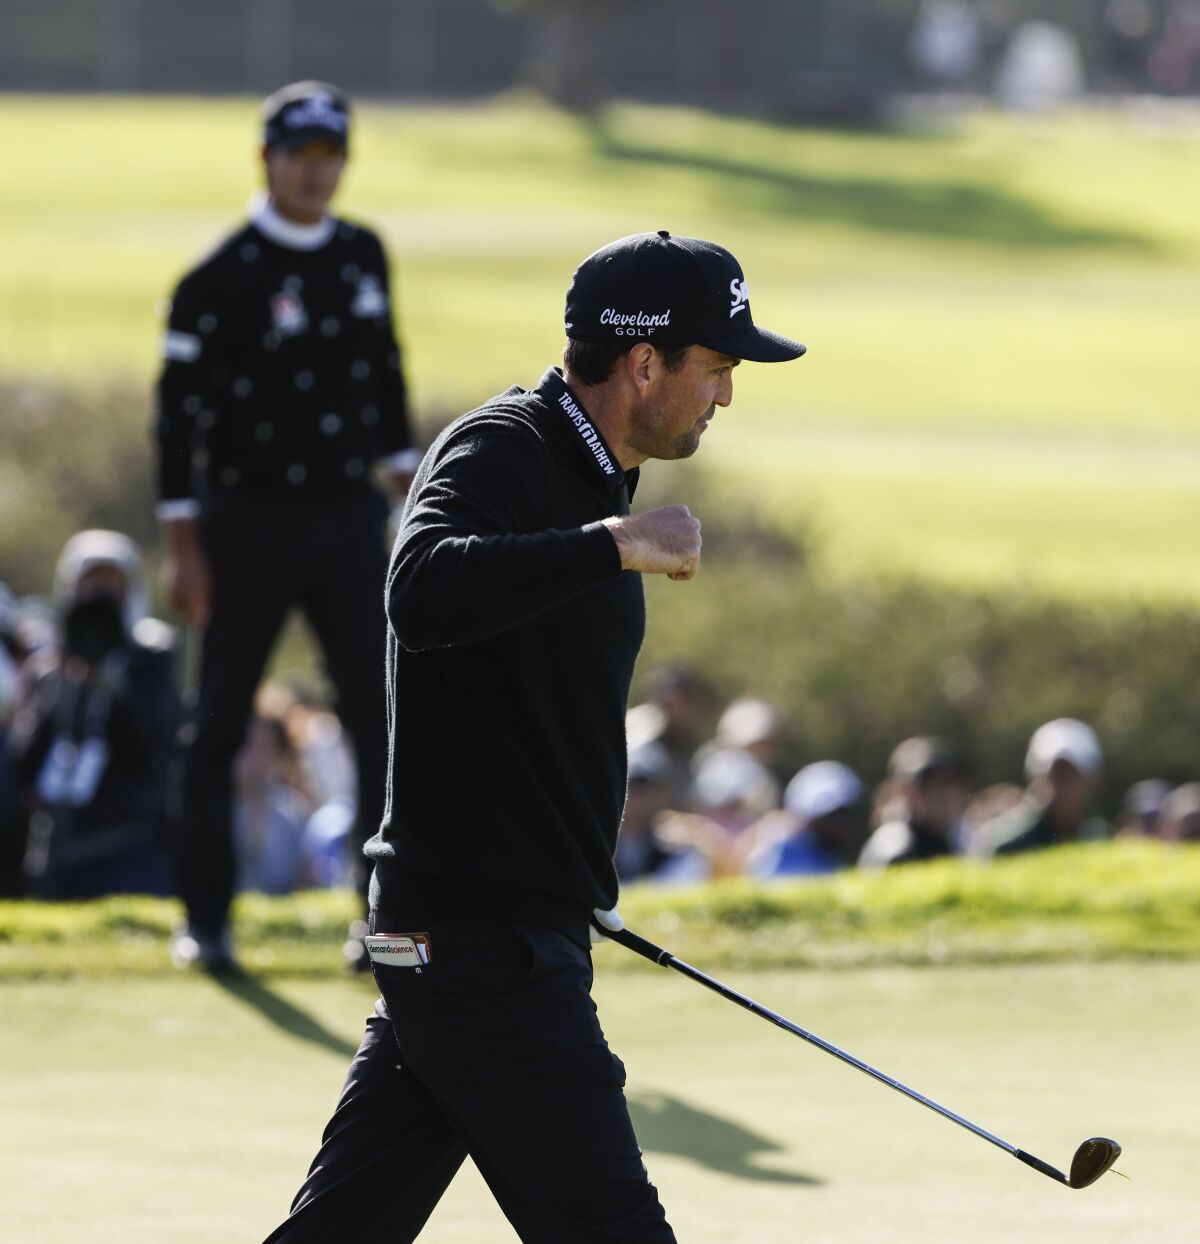 Keegan Bradley reacts after holing a chip shot on the 13th hole during the final round of Farmers Insurance Open.